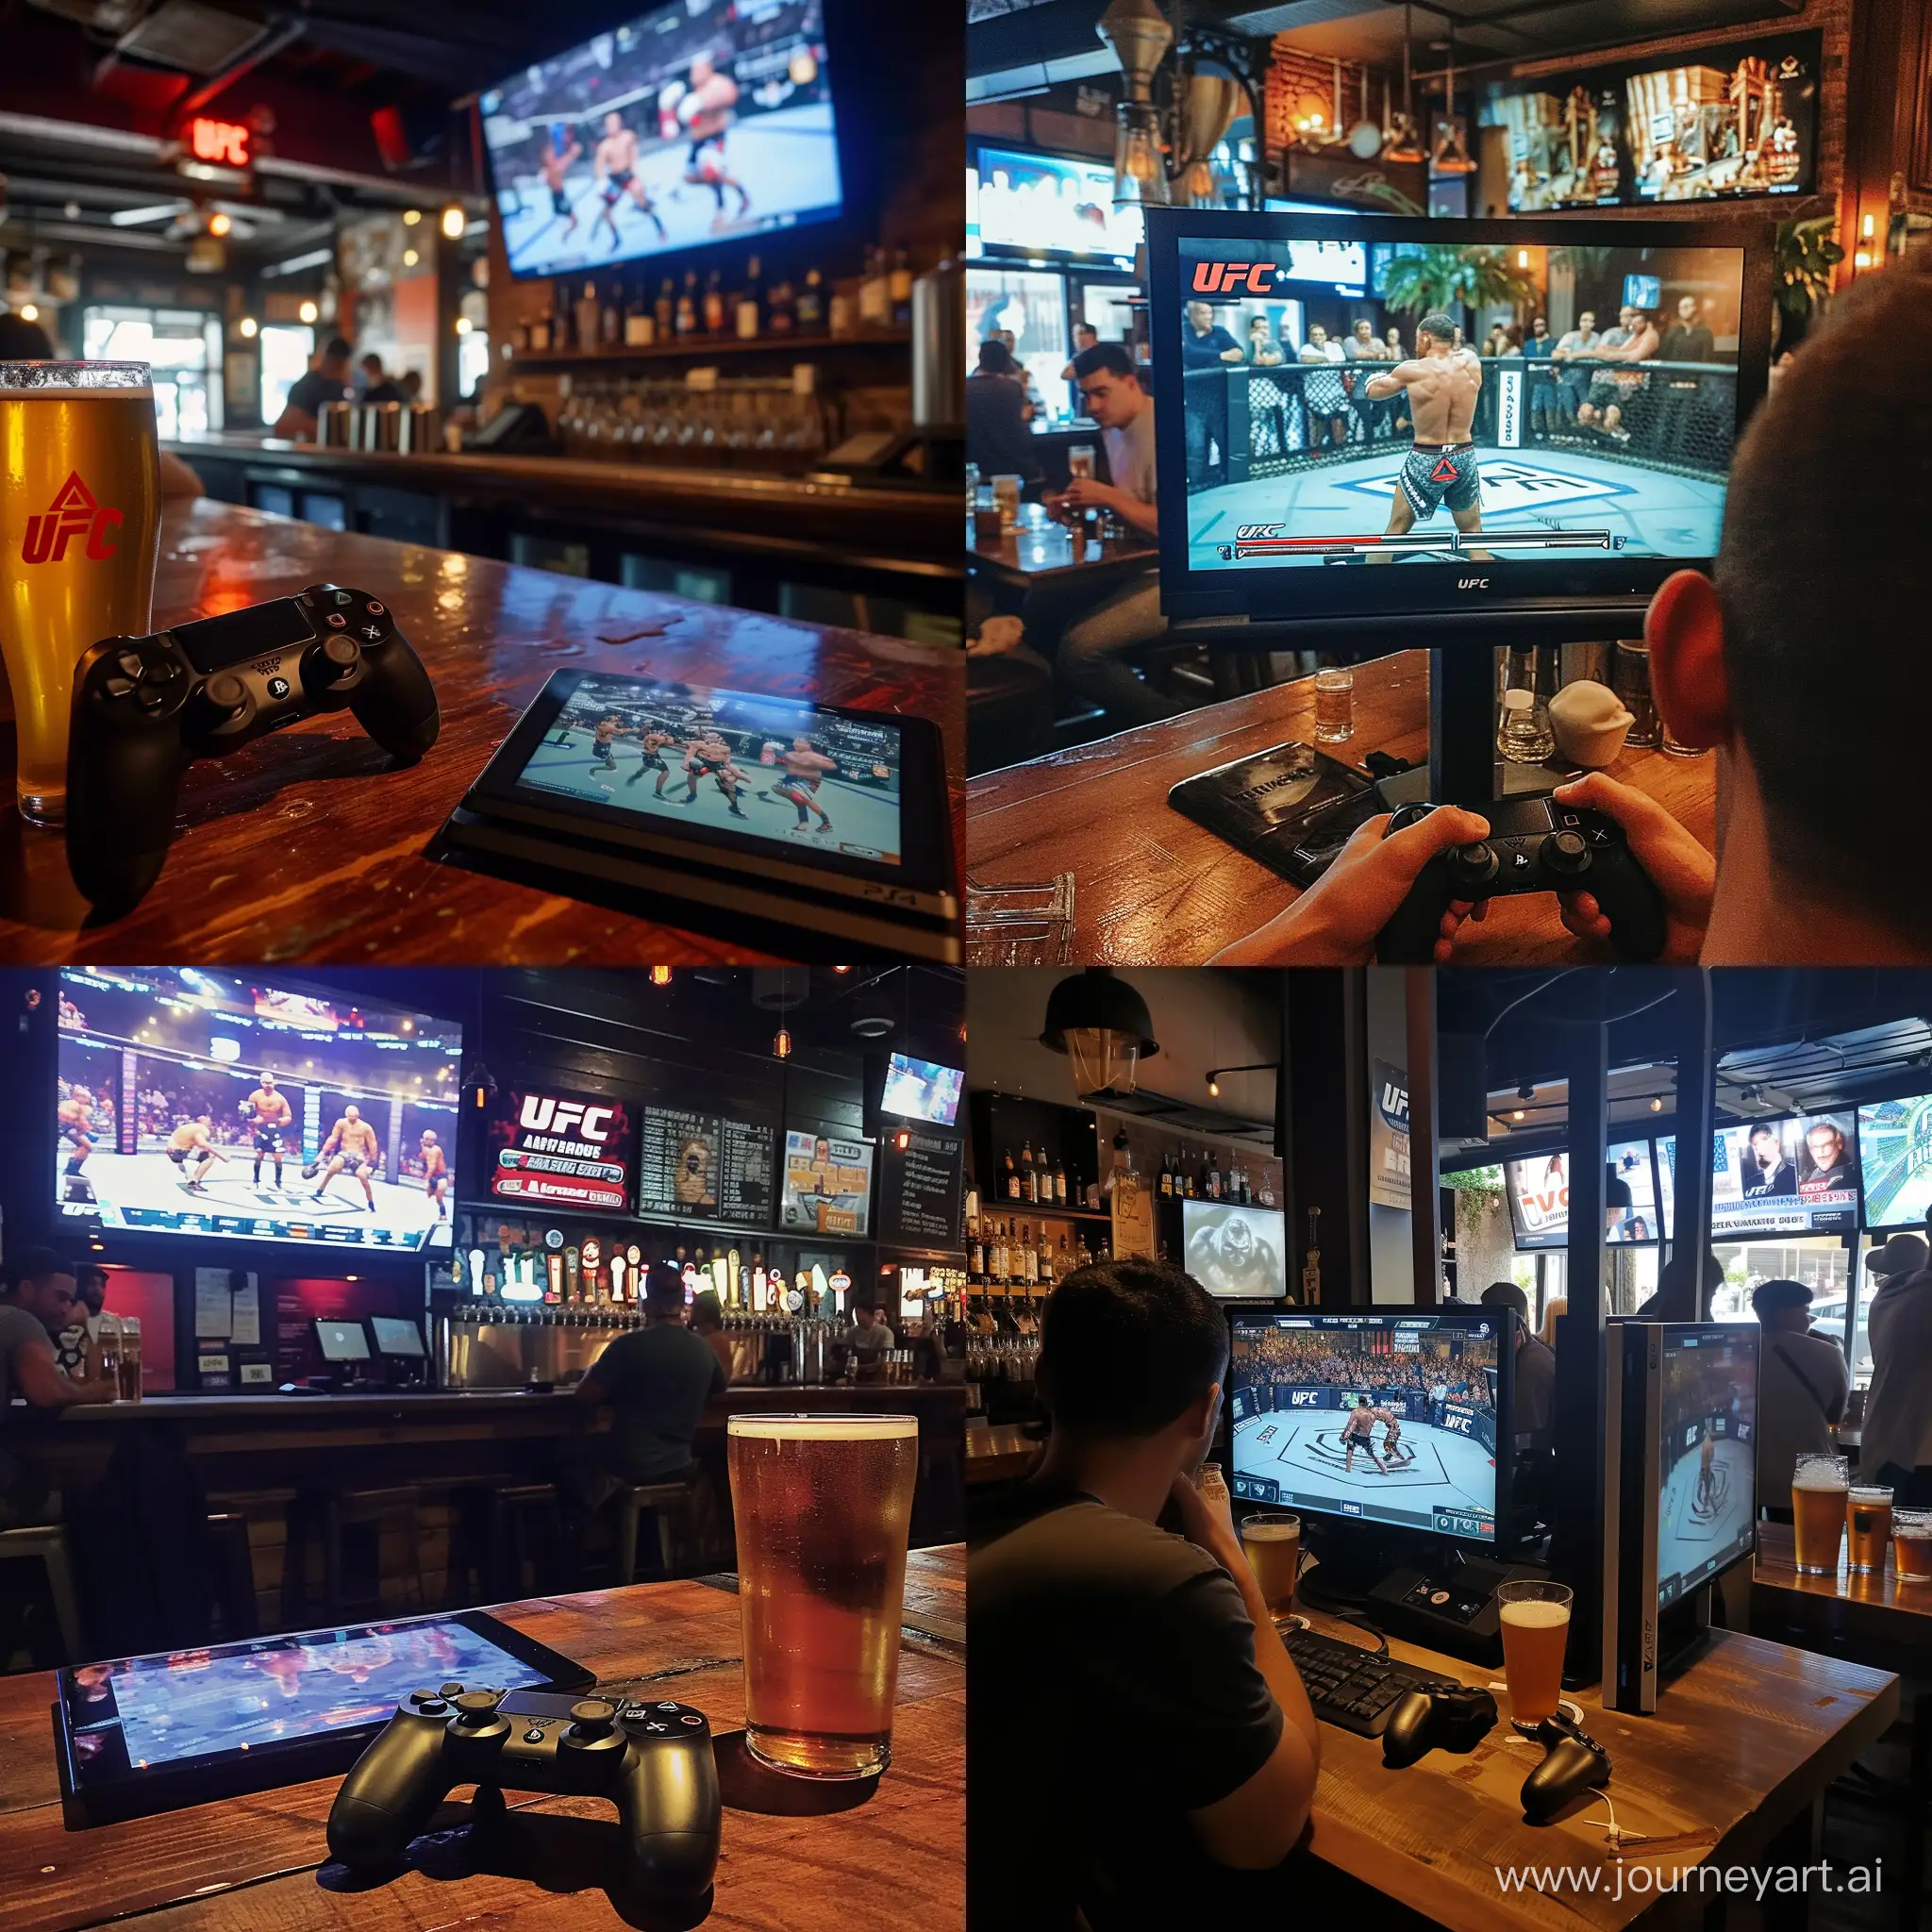 UFC-Competitions-on-Playstation-4-at-a-Beer-Bar